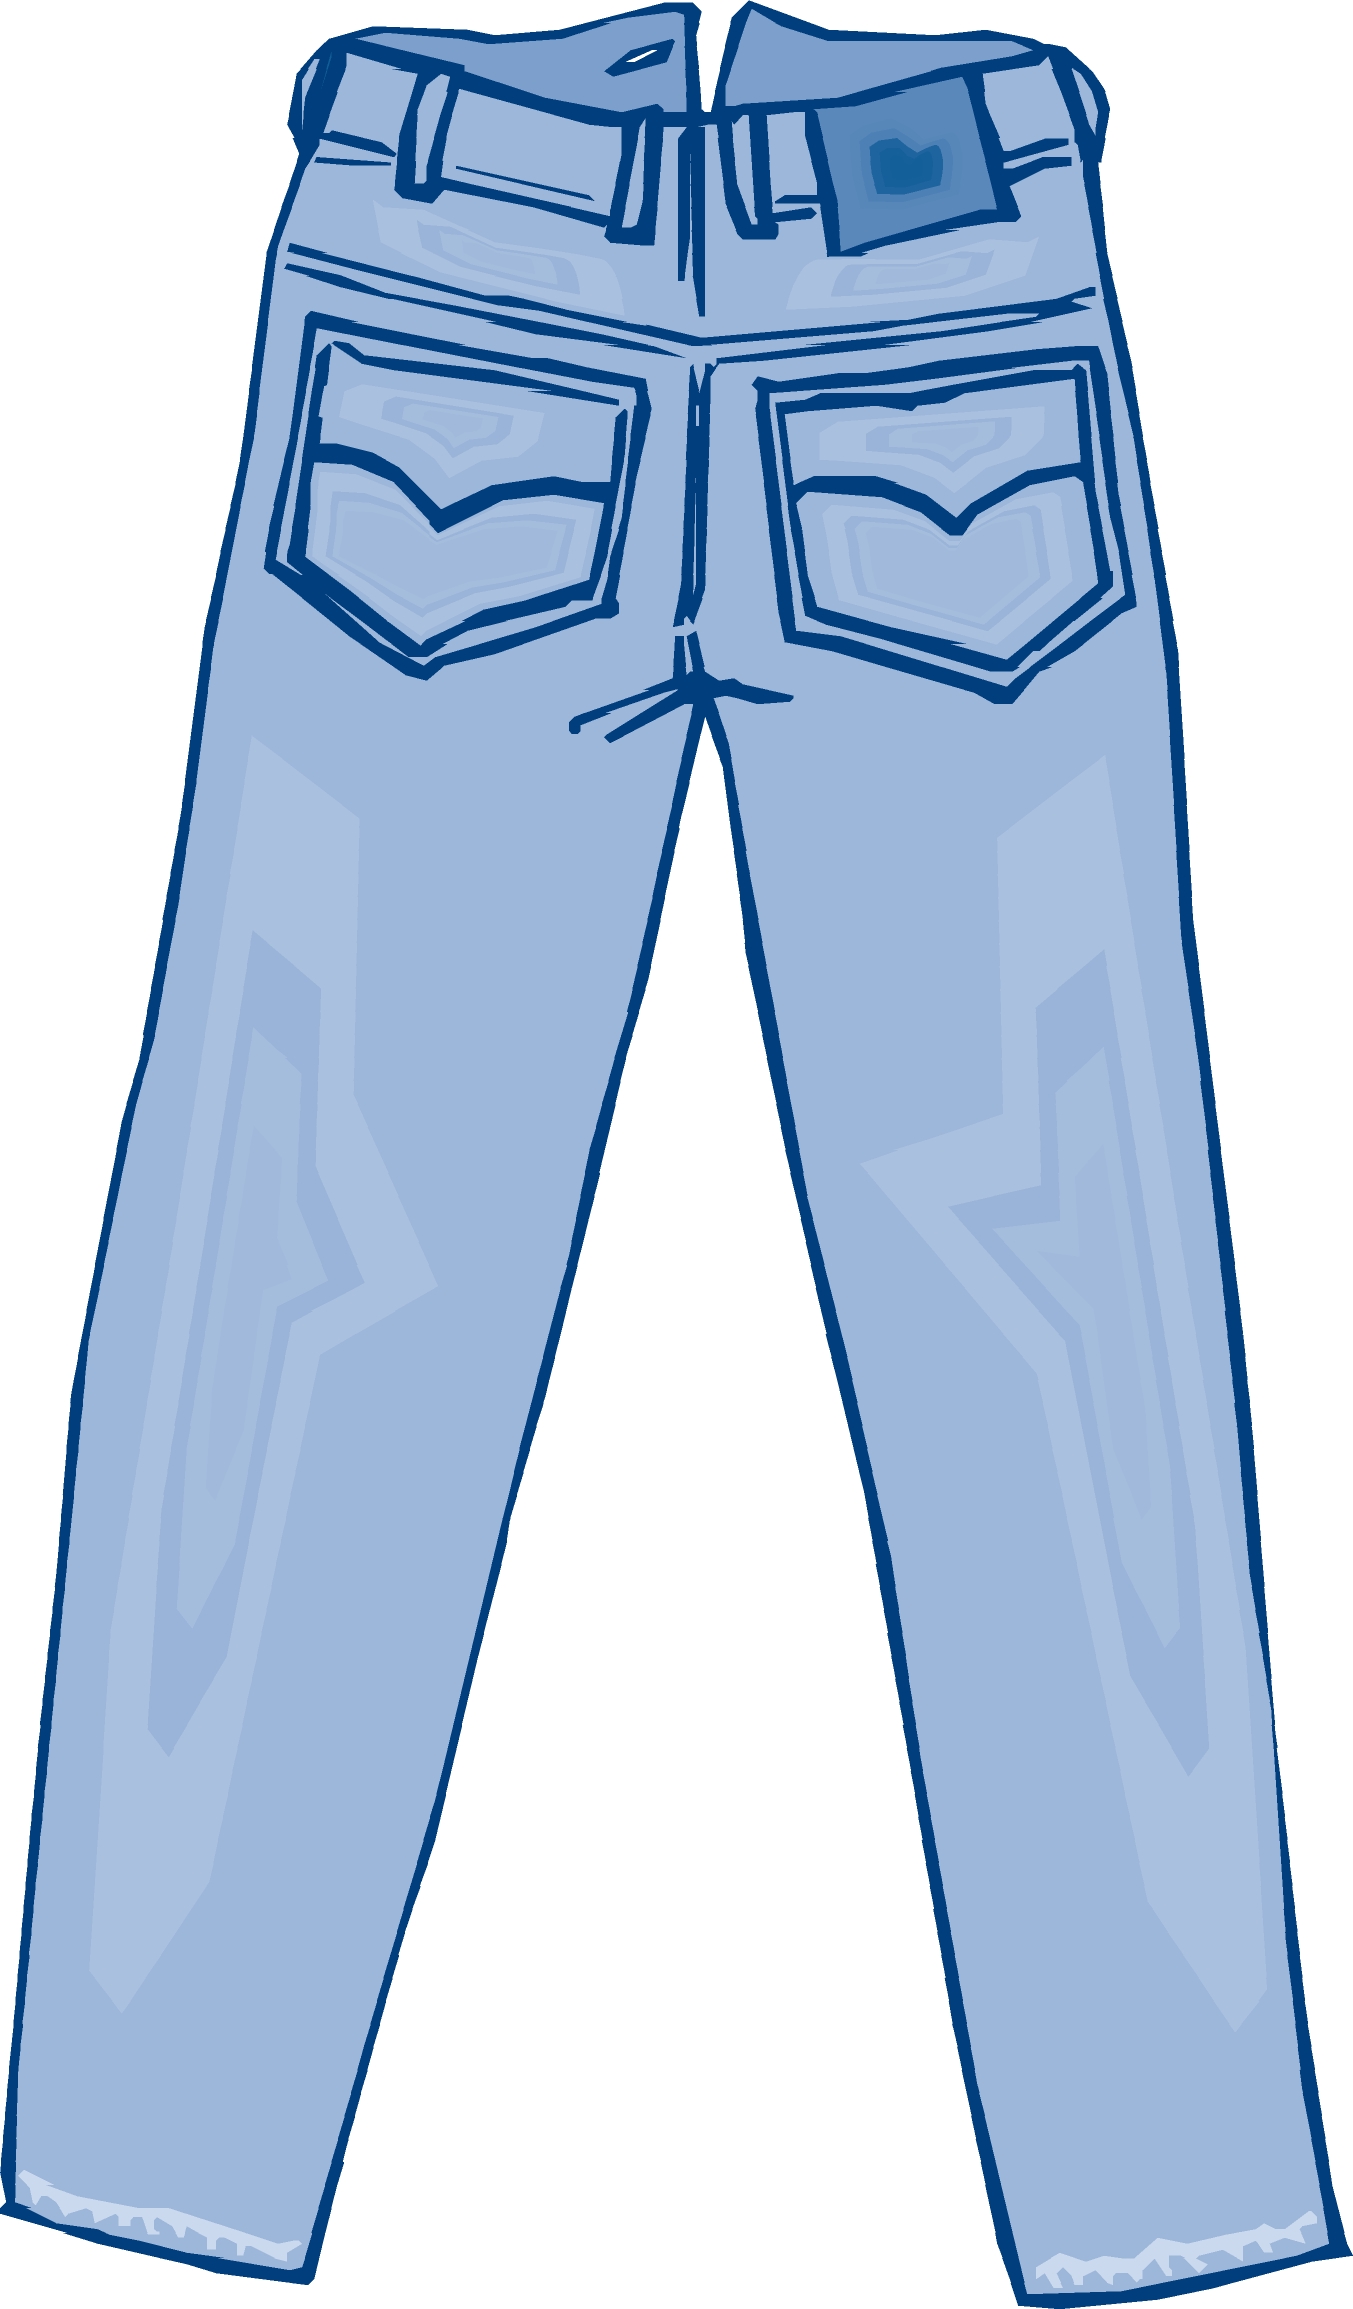 Pair of encode to. Jeans clipart